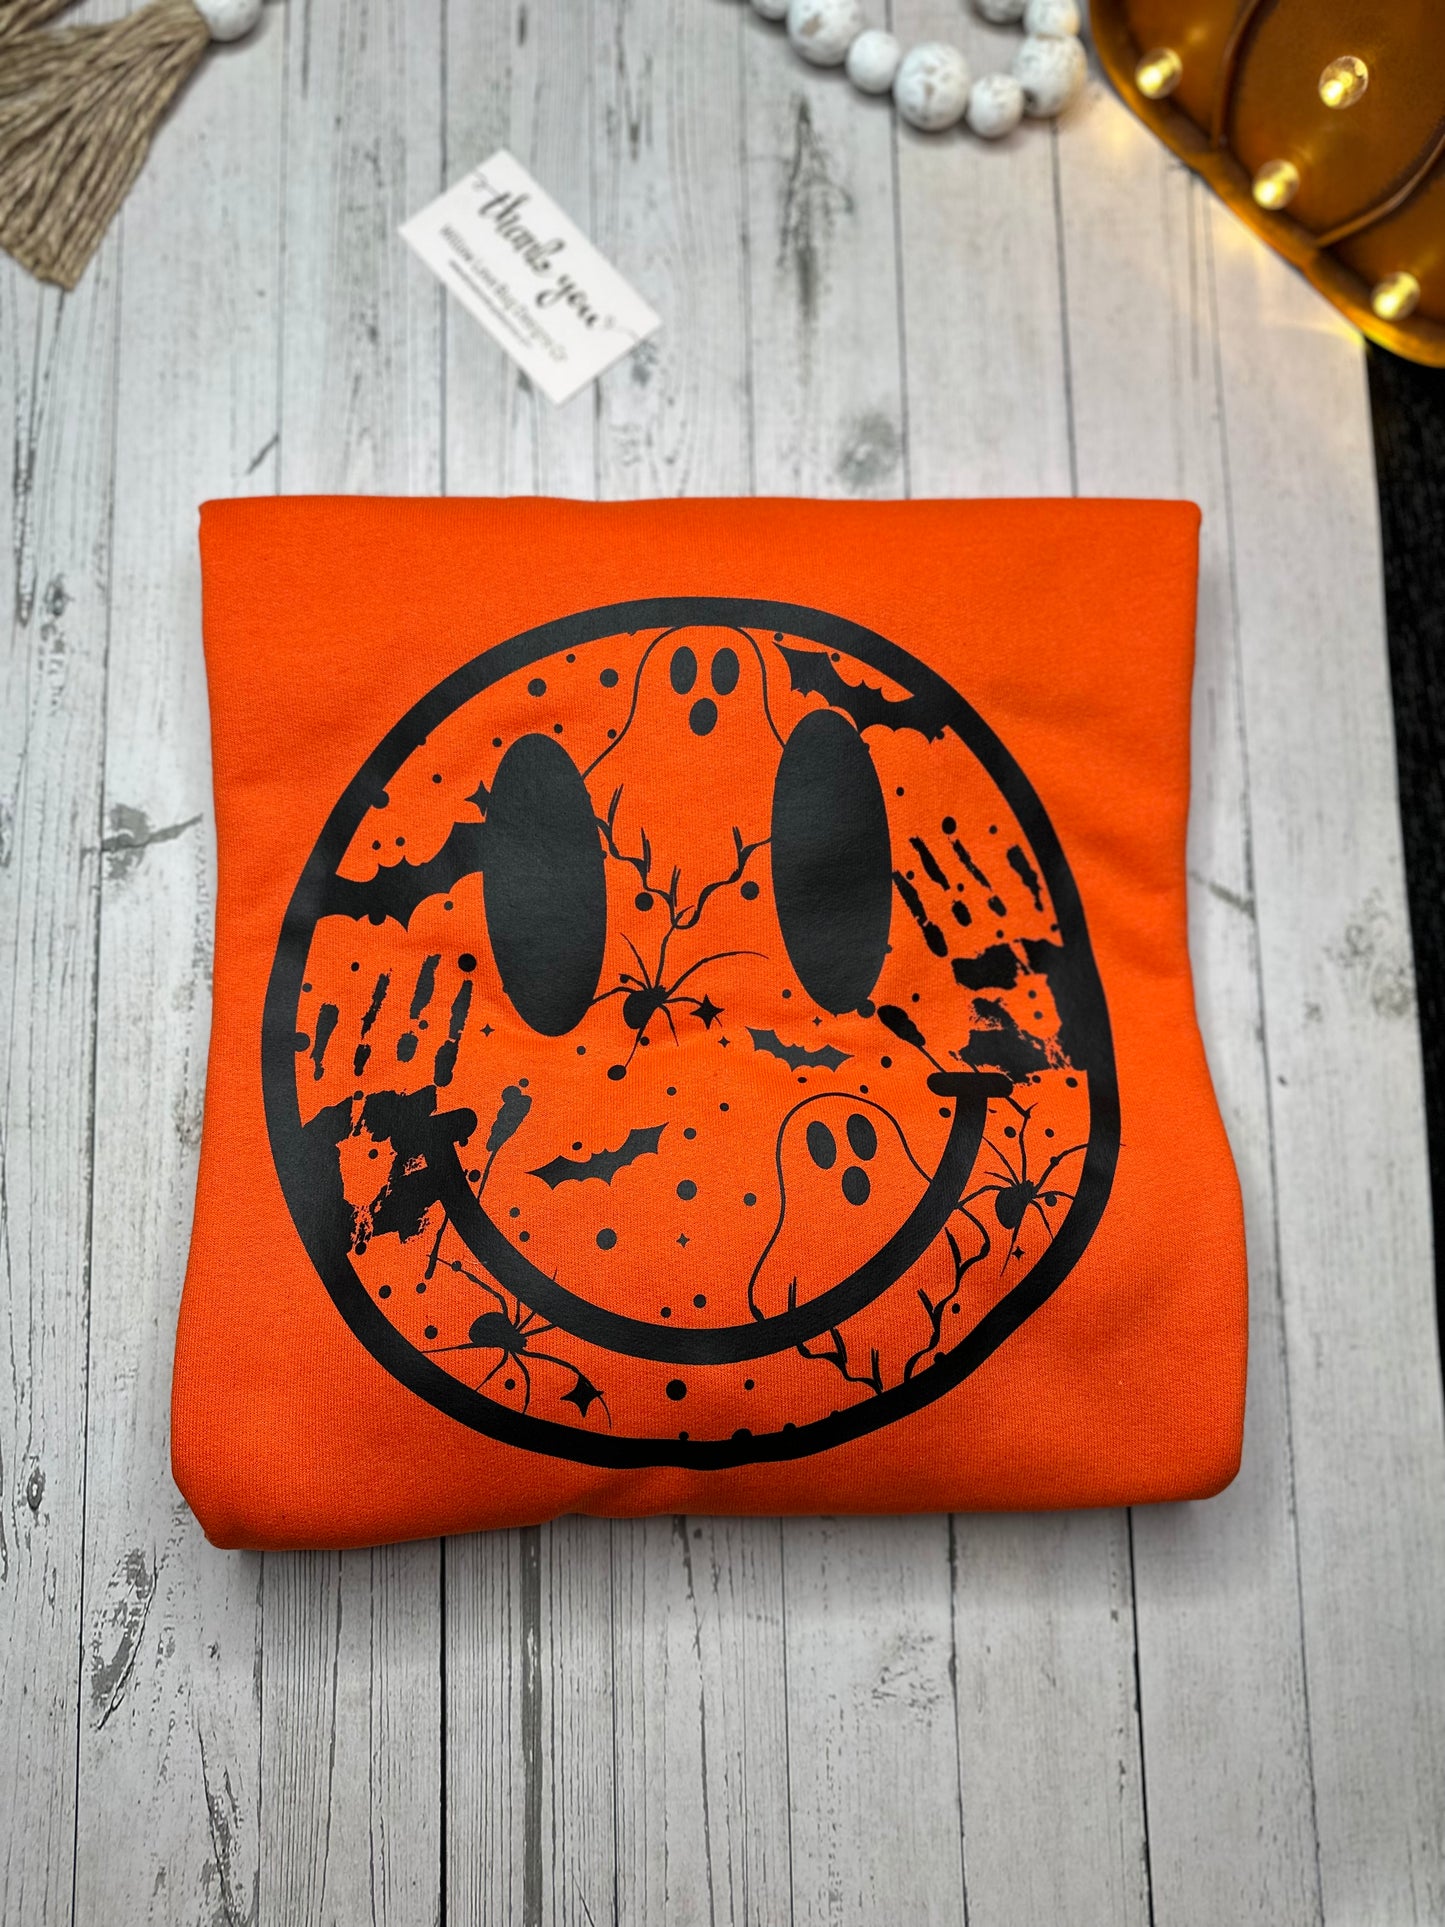 Spooky Happy Face - Willow Love Bug Designs 